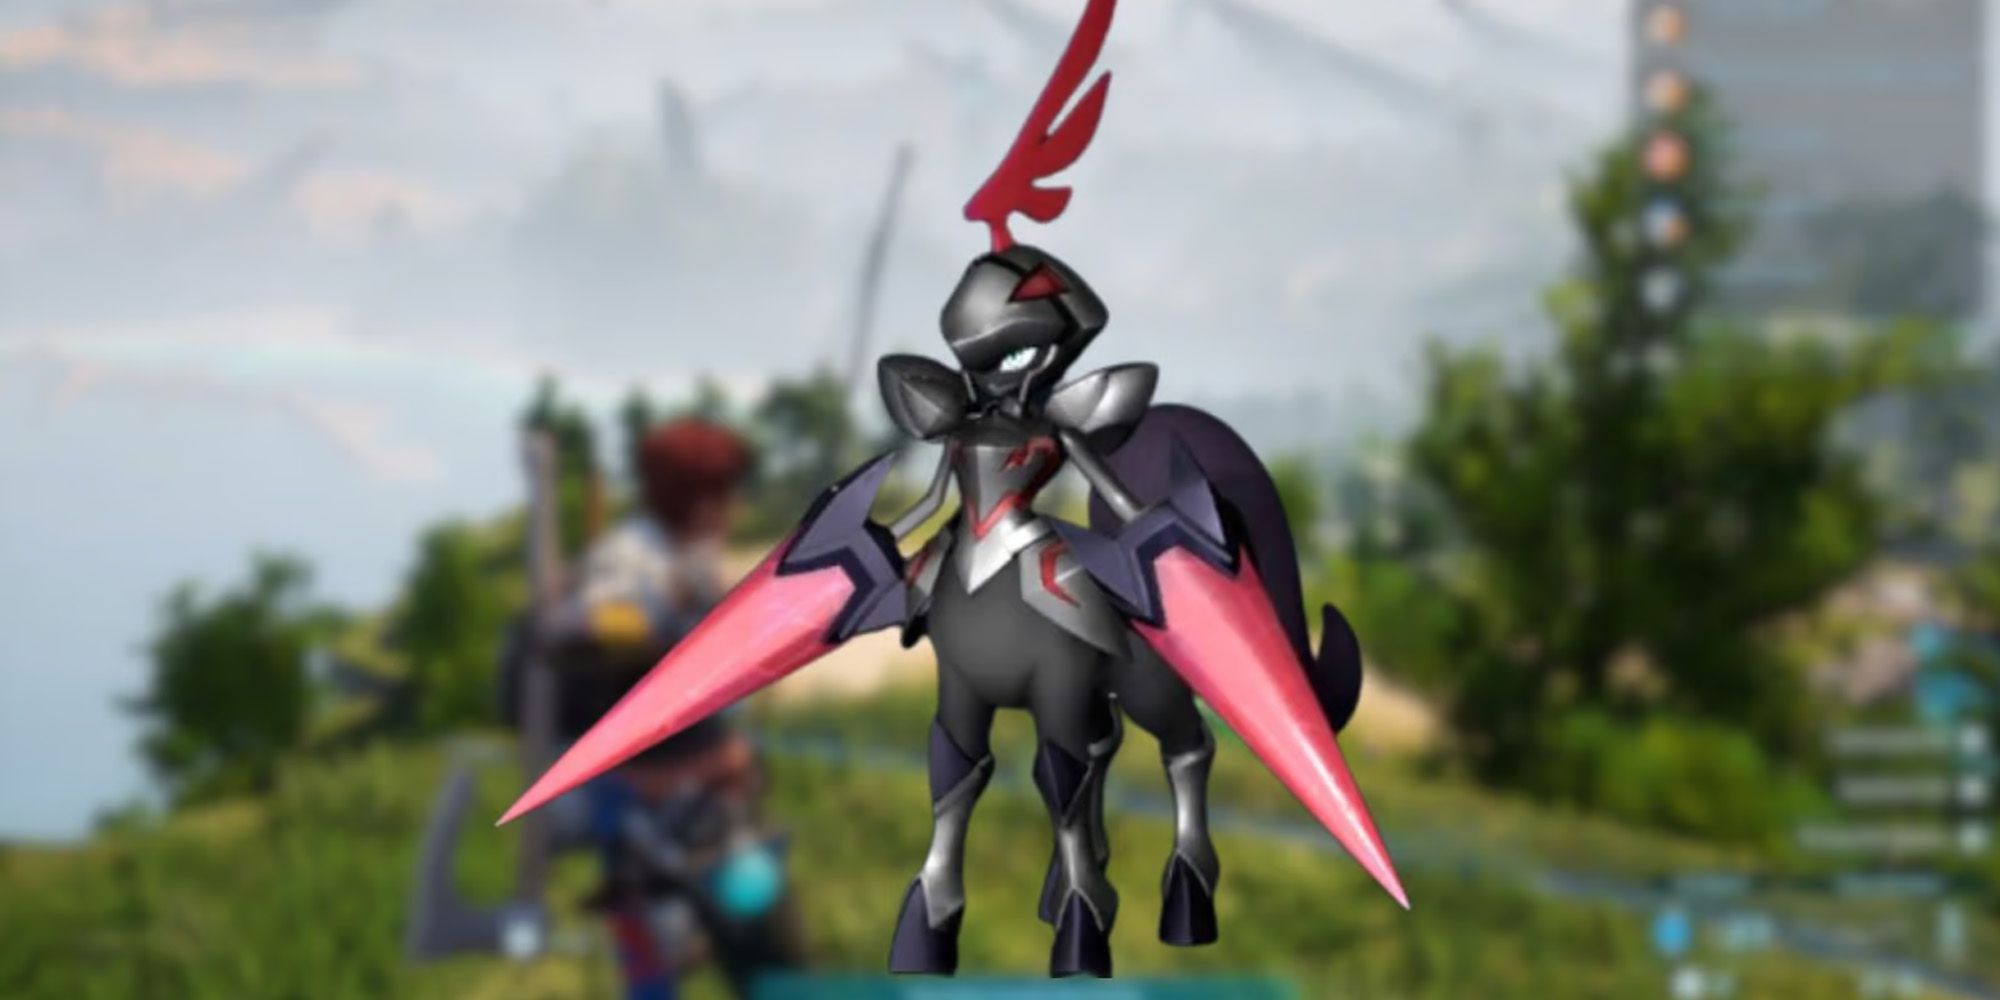 An image of Necromus standing against a blurry background